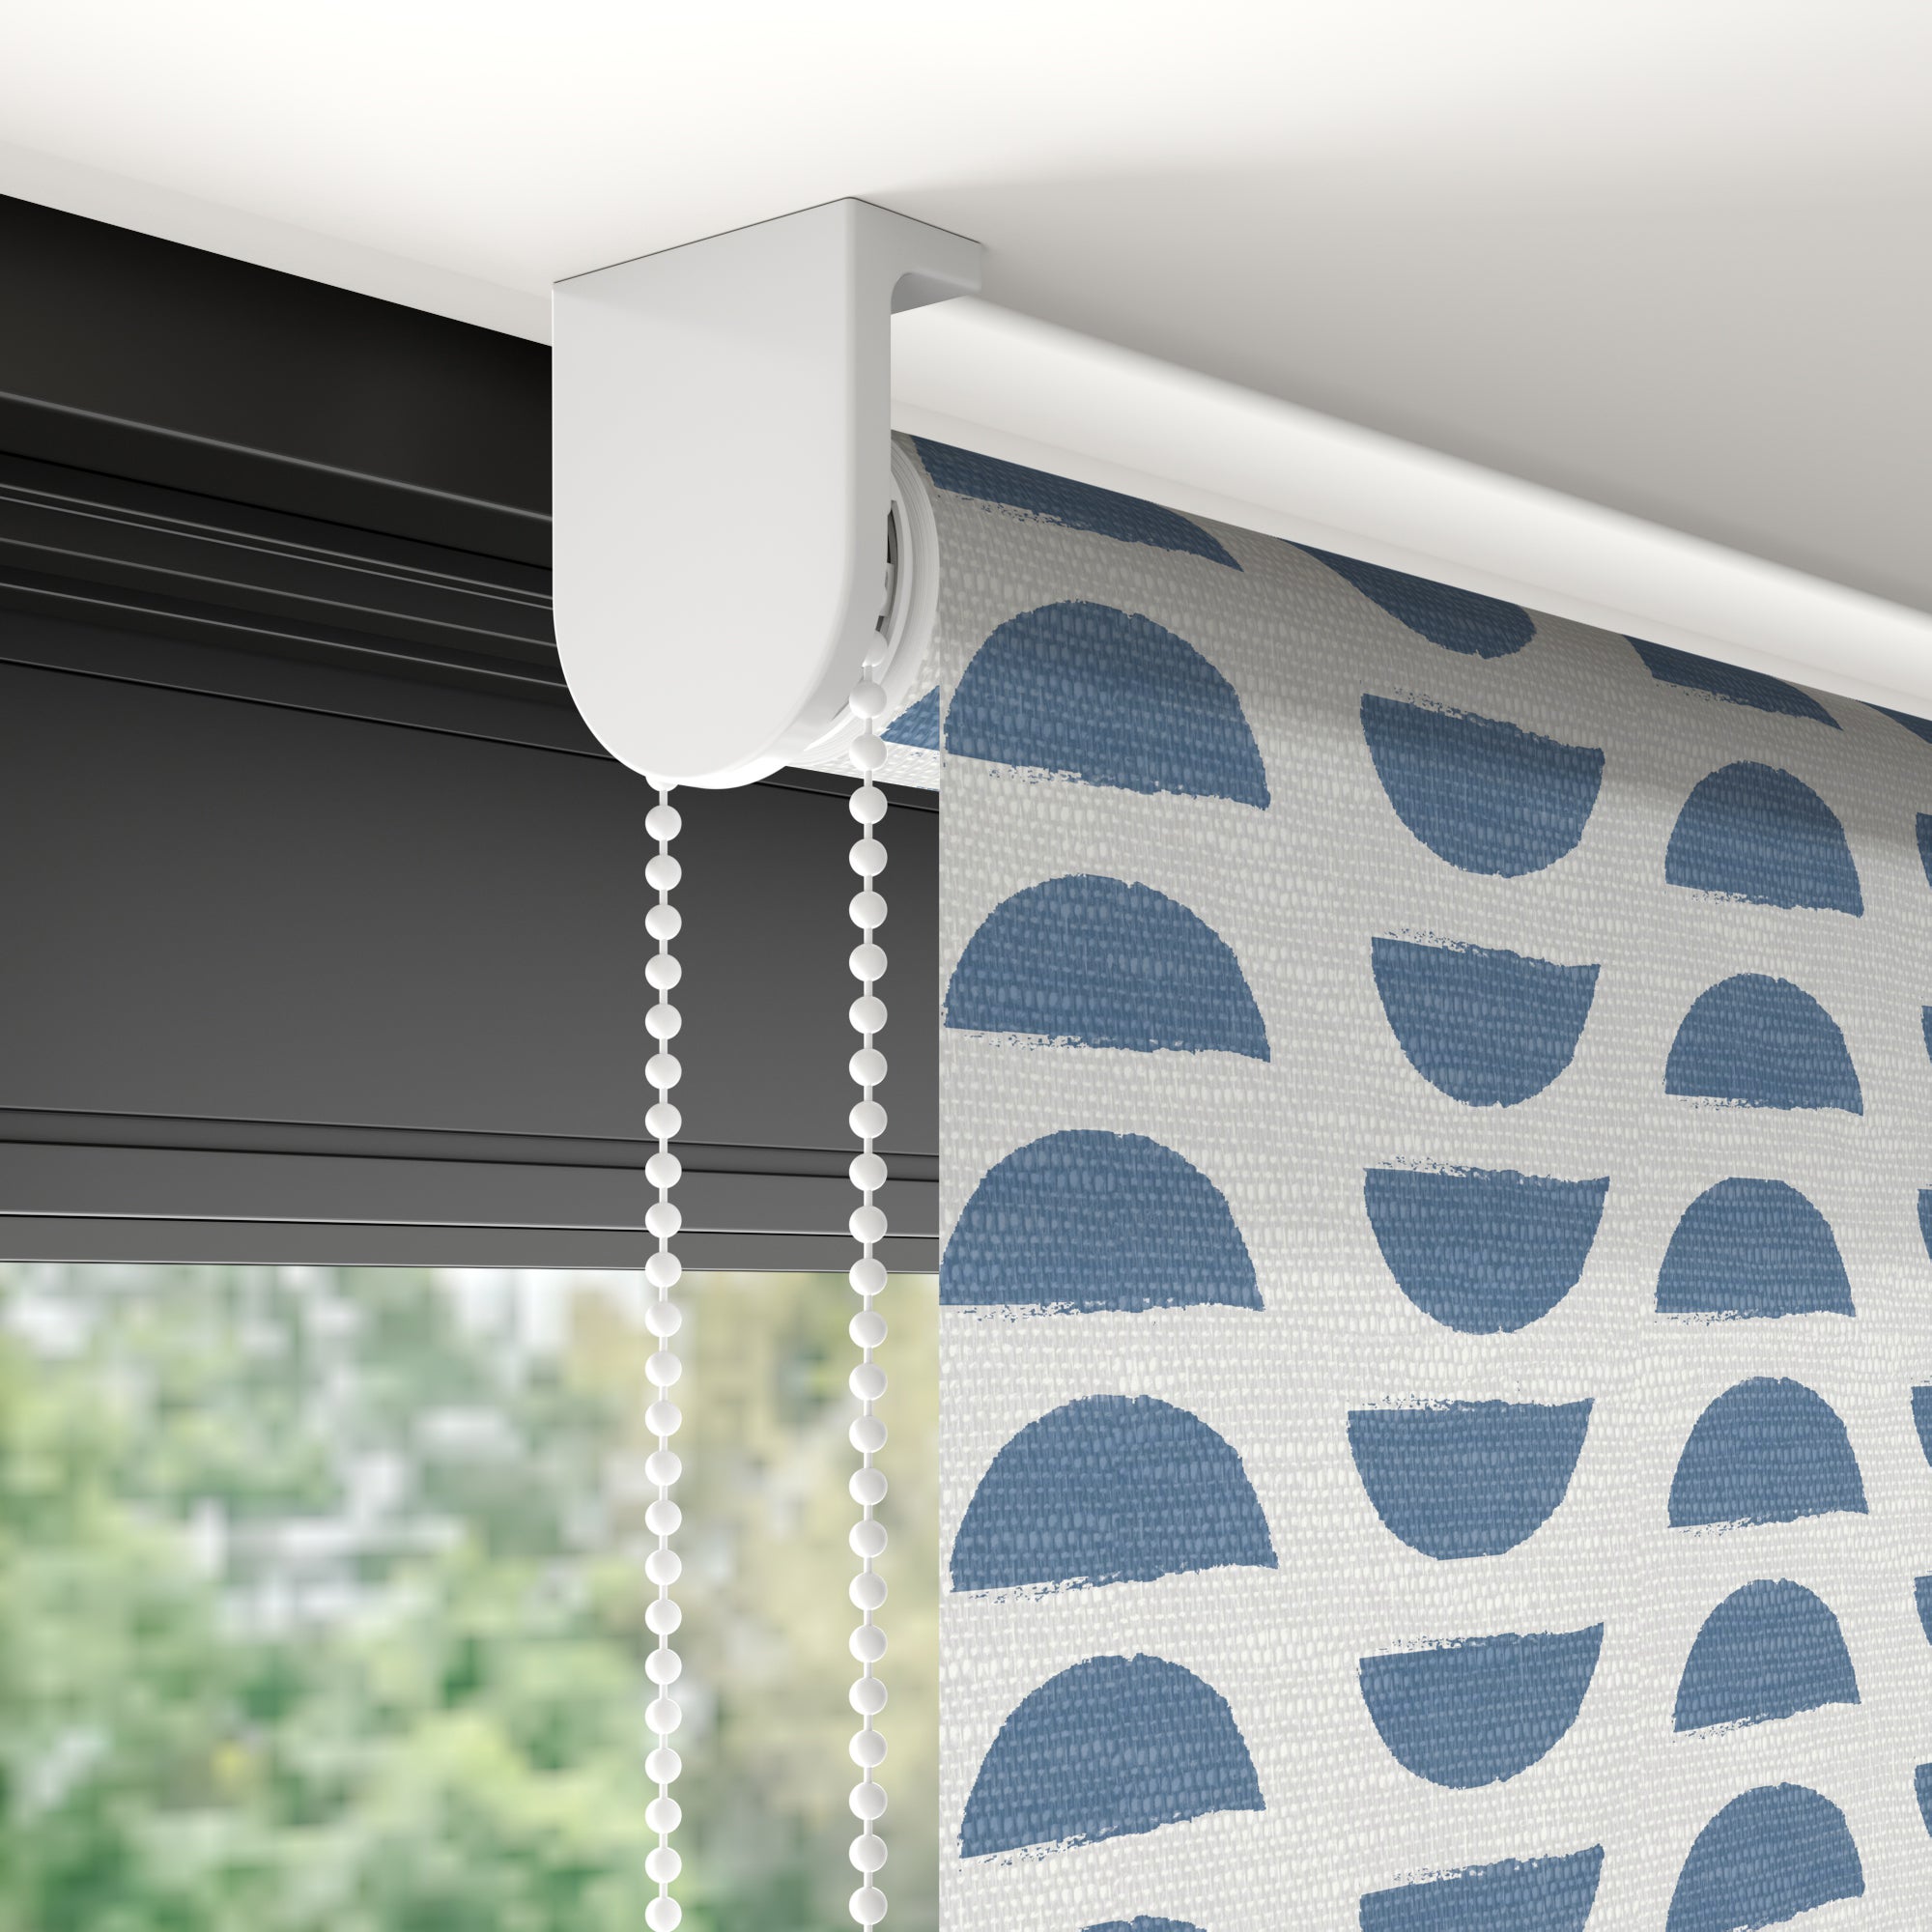 Kenzo Daylight Made to Measure Roller Blind Kenzo Midnight